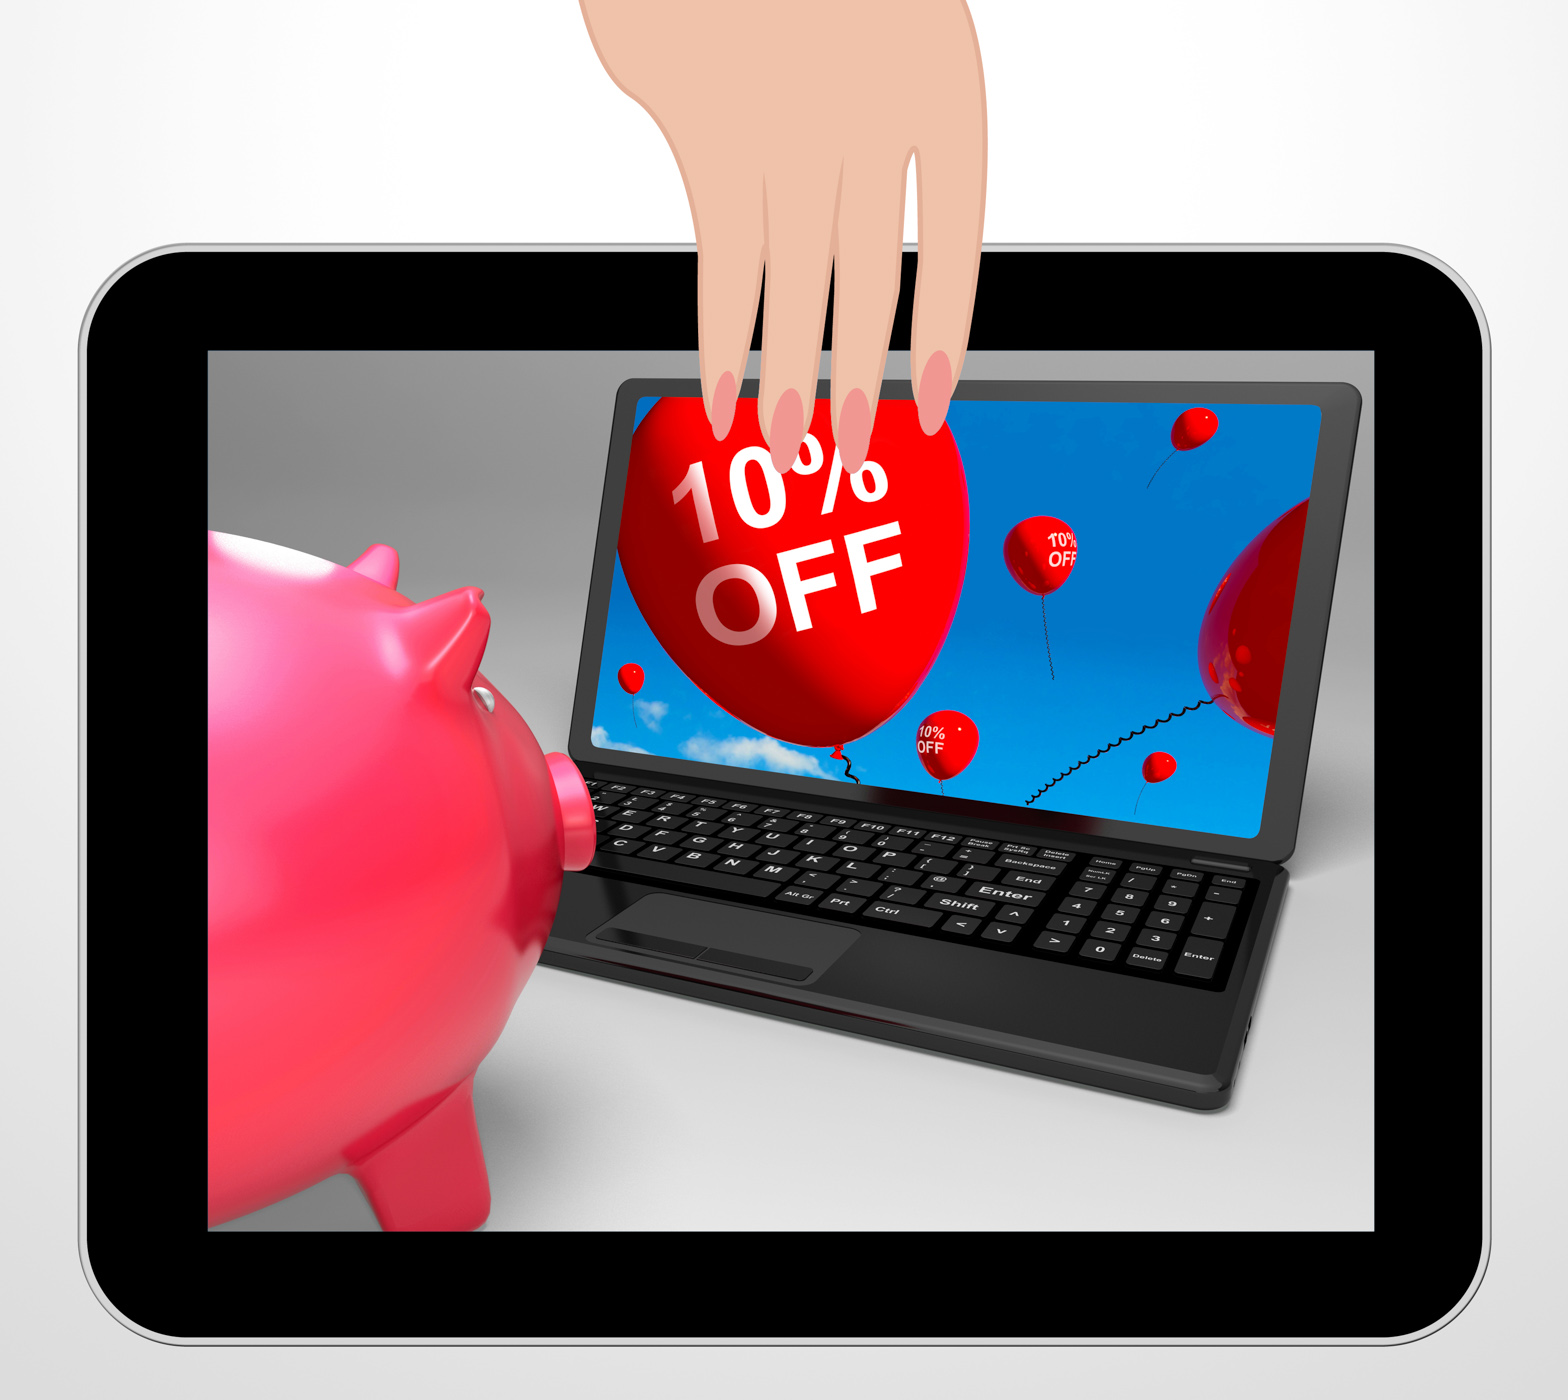 Ten percent off laptop displays online sale and bargains photo